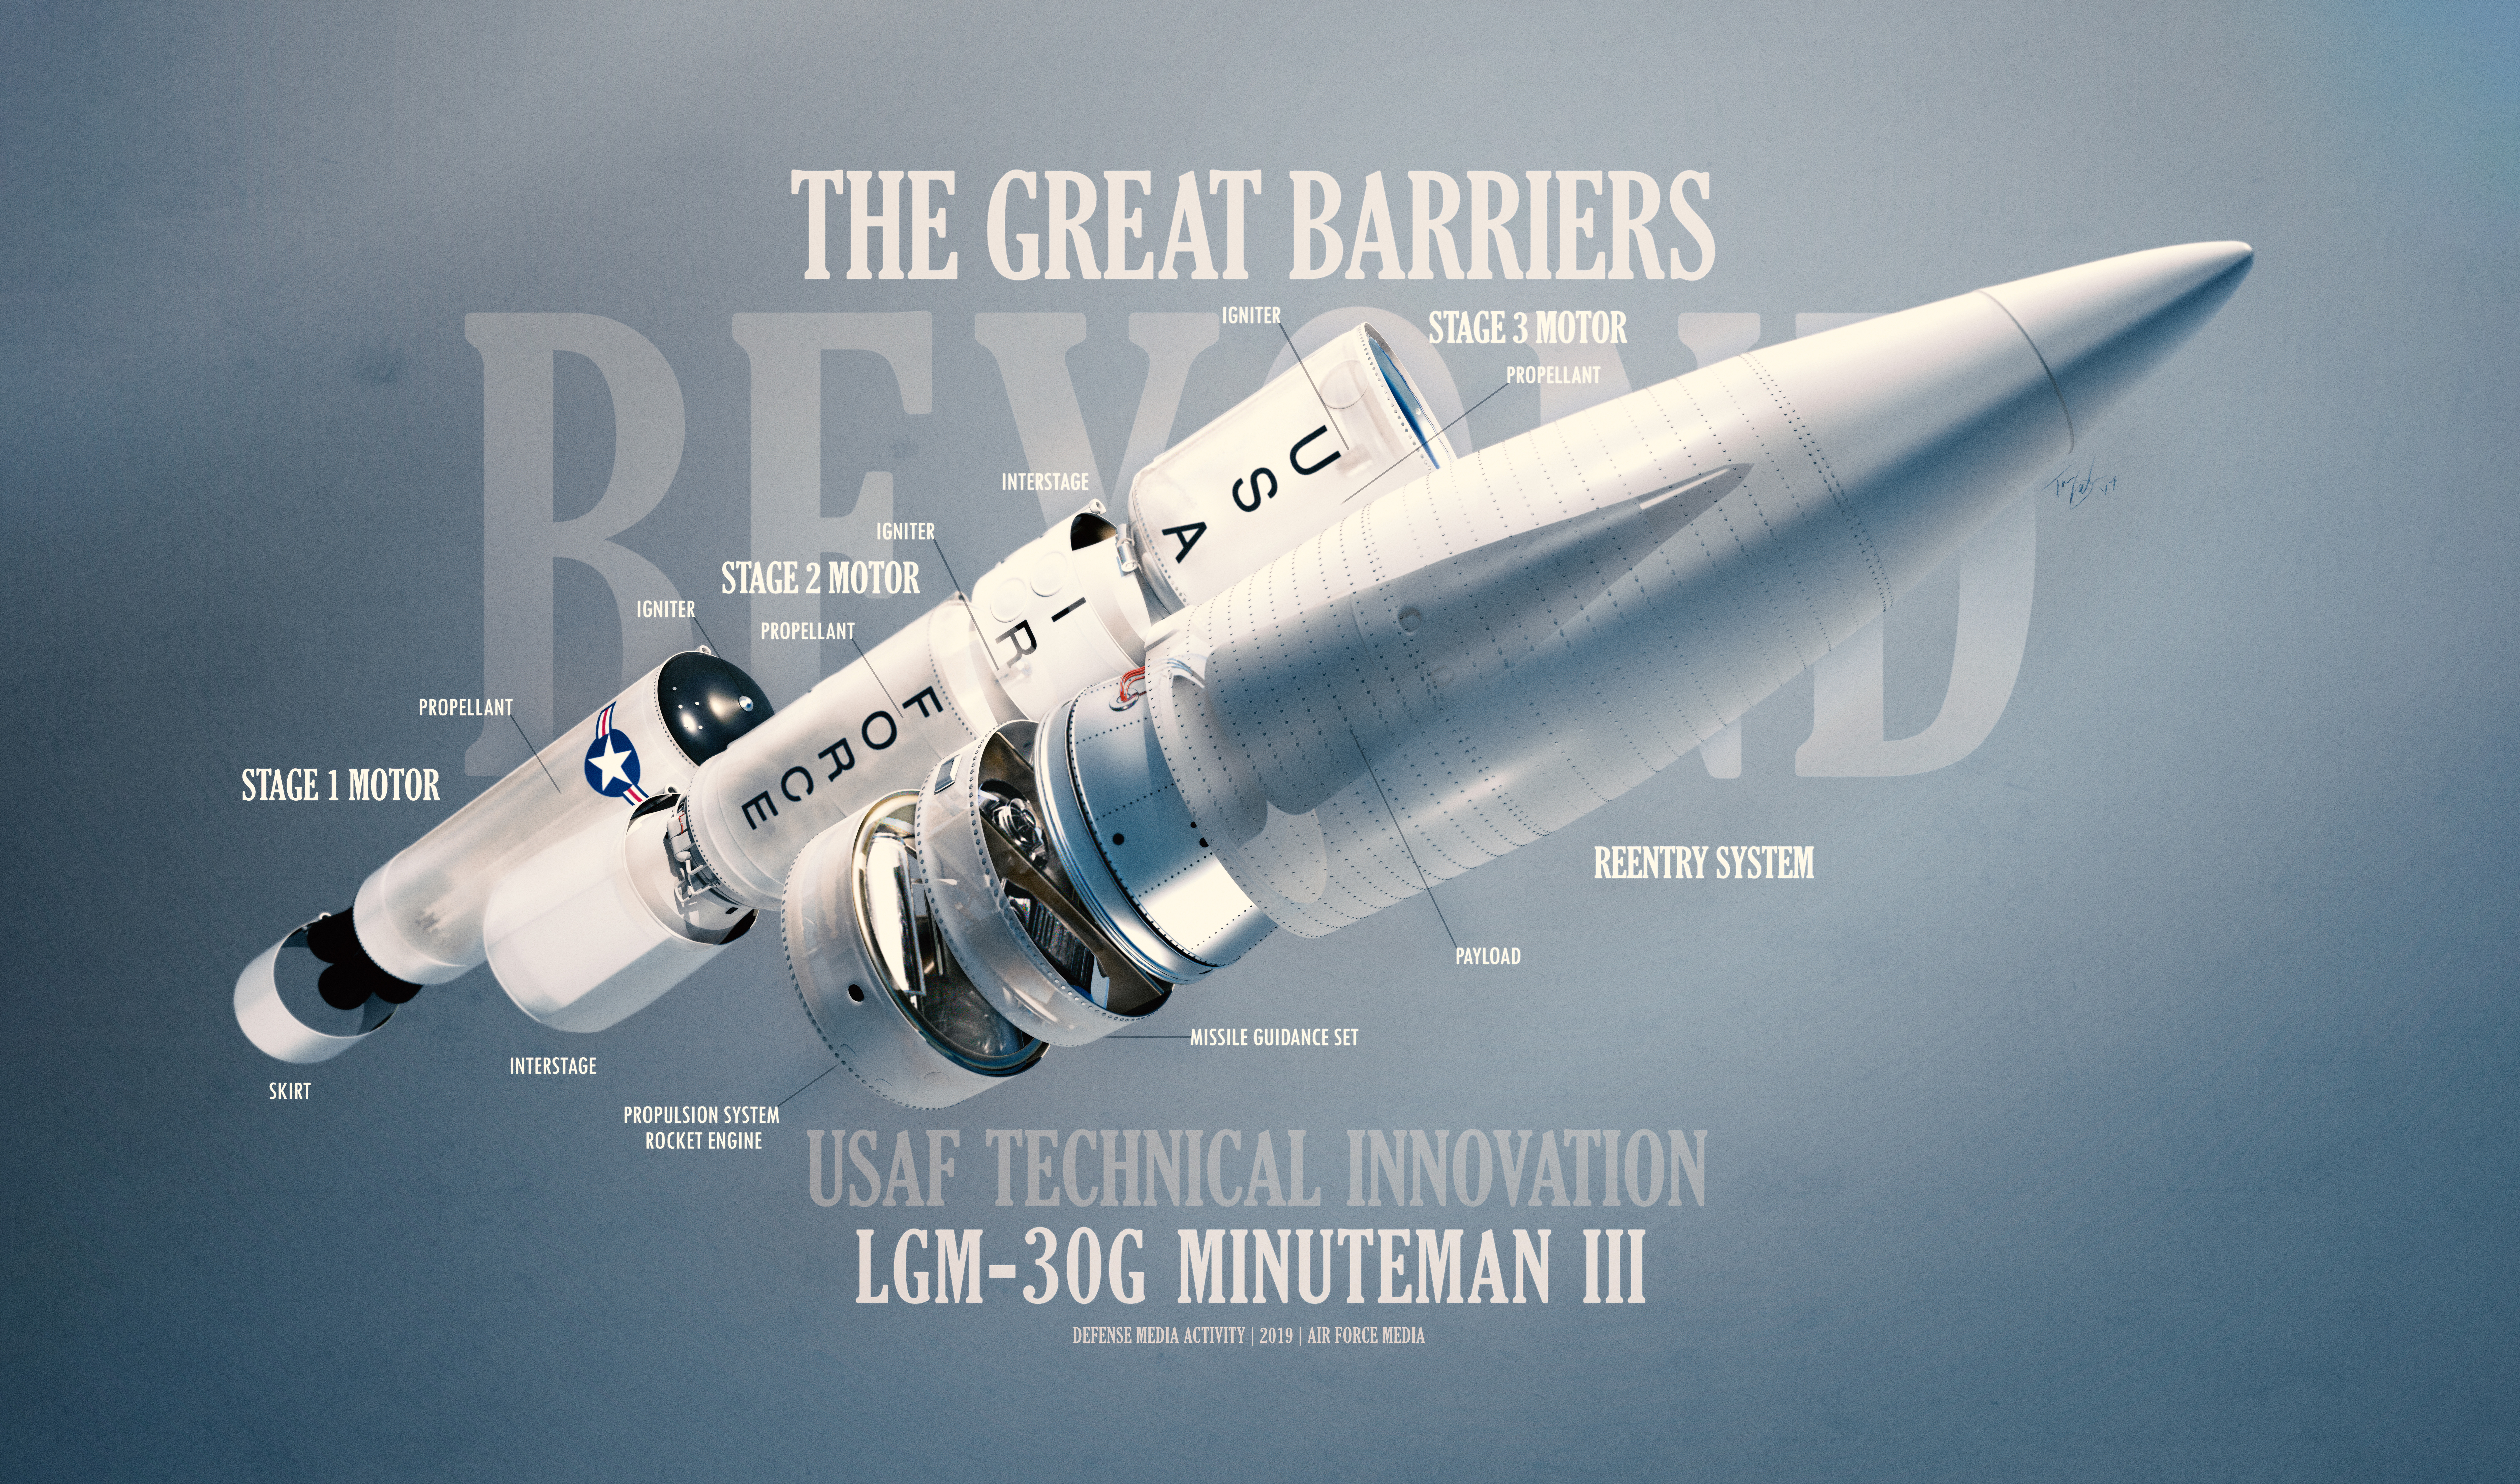 Illustration showing the components of the LGM-30G Minuteman III ICBM.